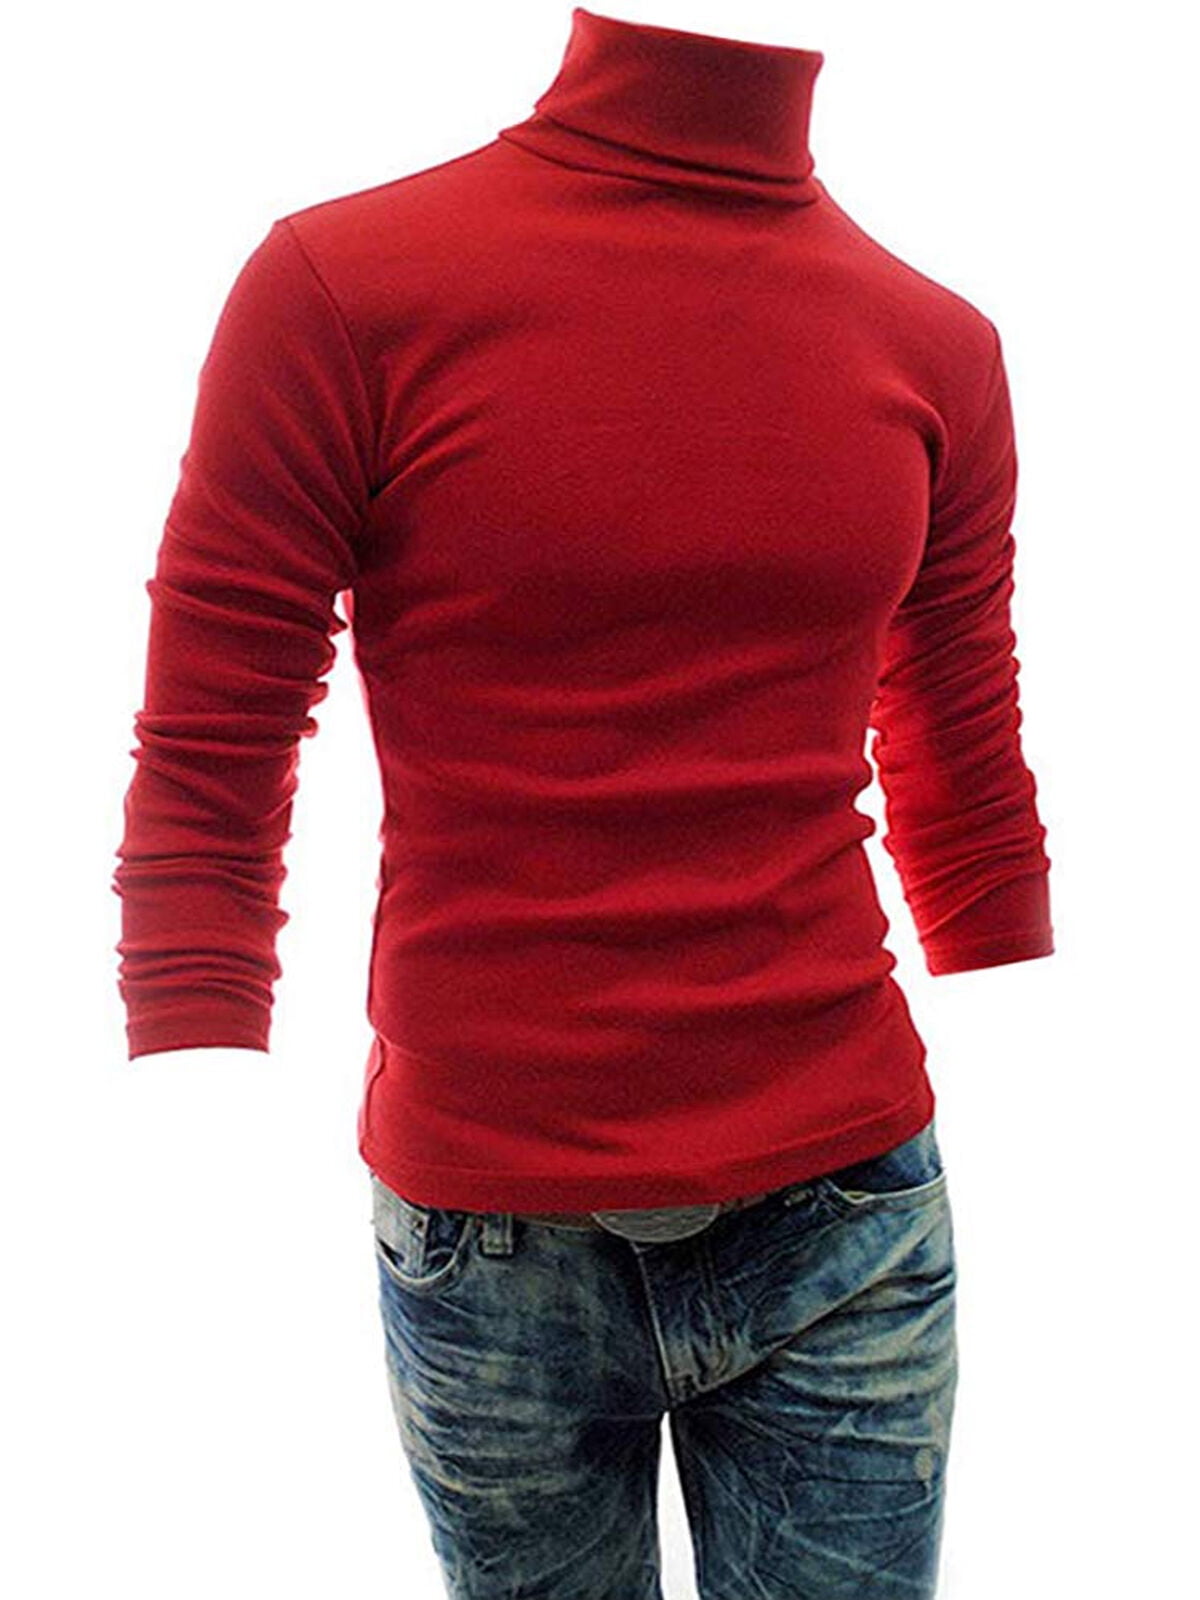 Fashion Mens Roll Neck Long Sleeve Cotton Top High Neck Turtle Neck Sweater Tops